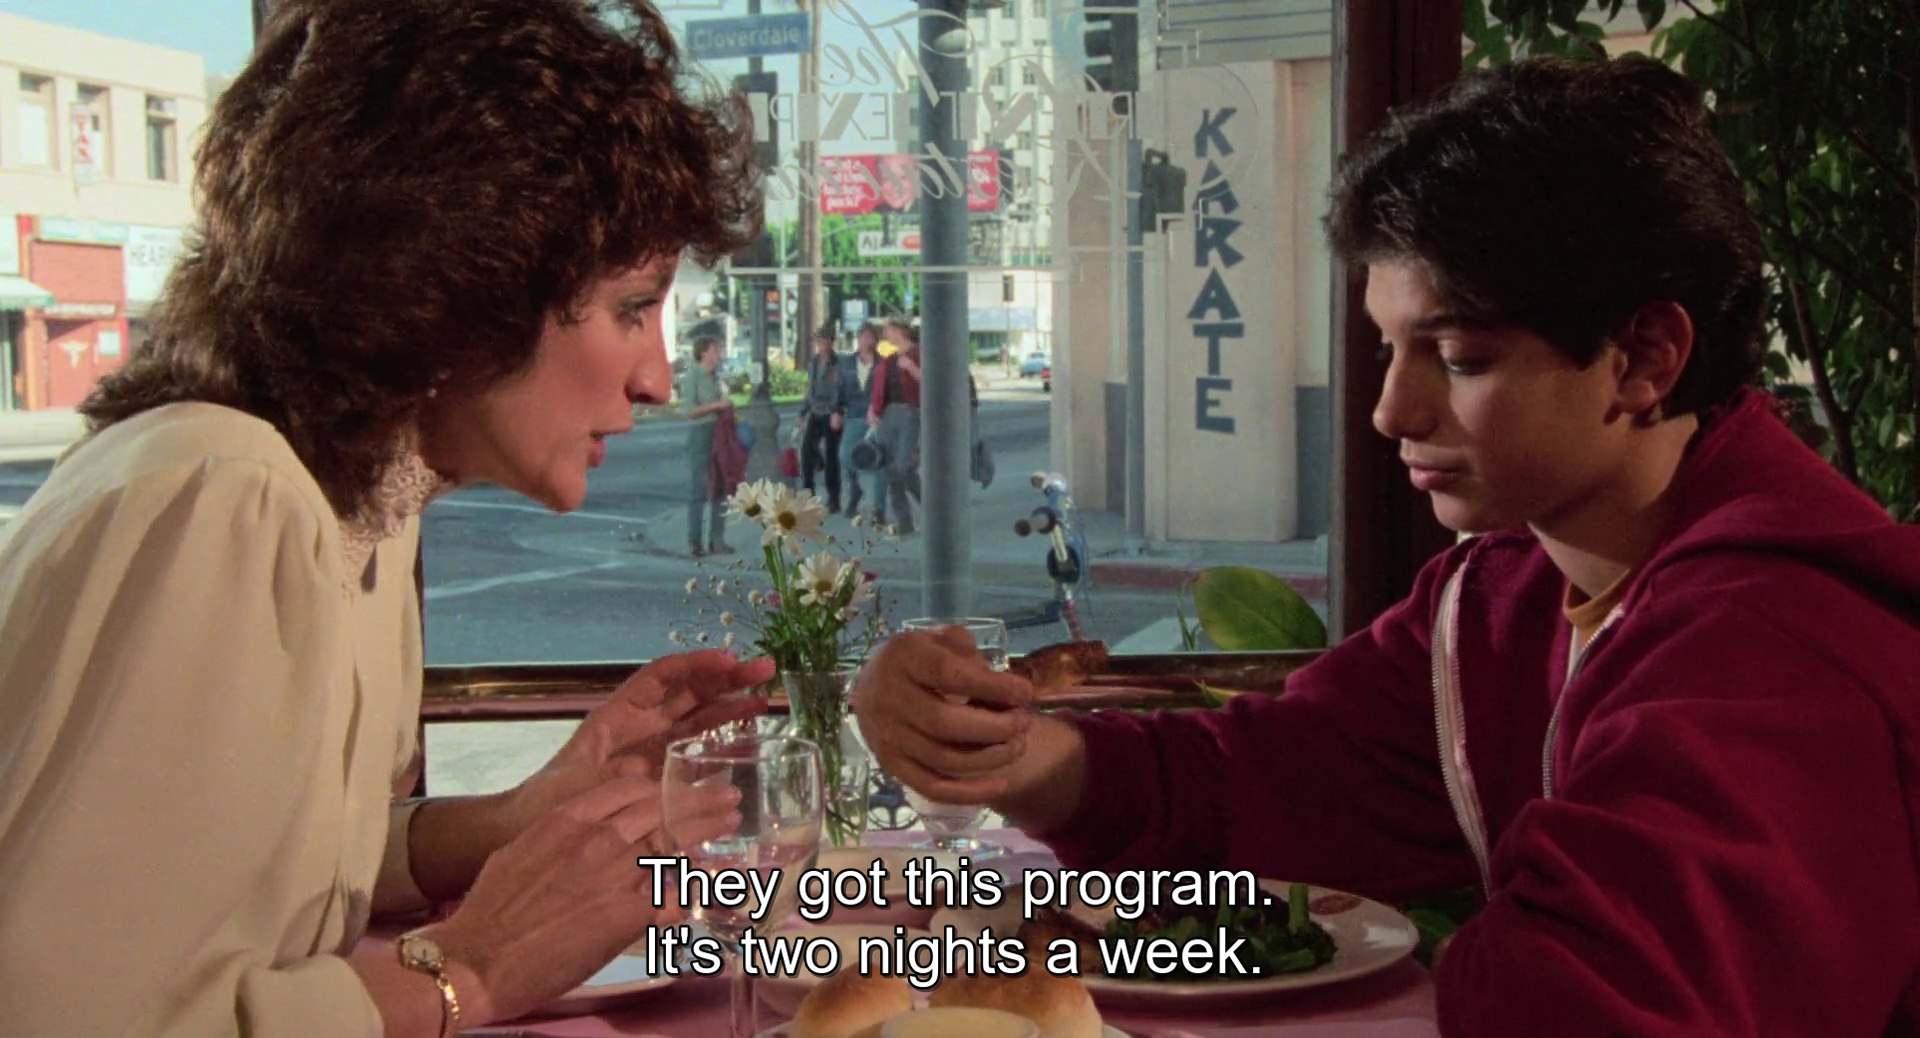 
Lucille and Daniel sitting in the restaurant, going through the dialogue written above.
The subtitles read: They got this program. It&rsquo;s two nights a week.
